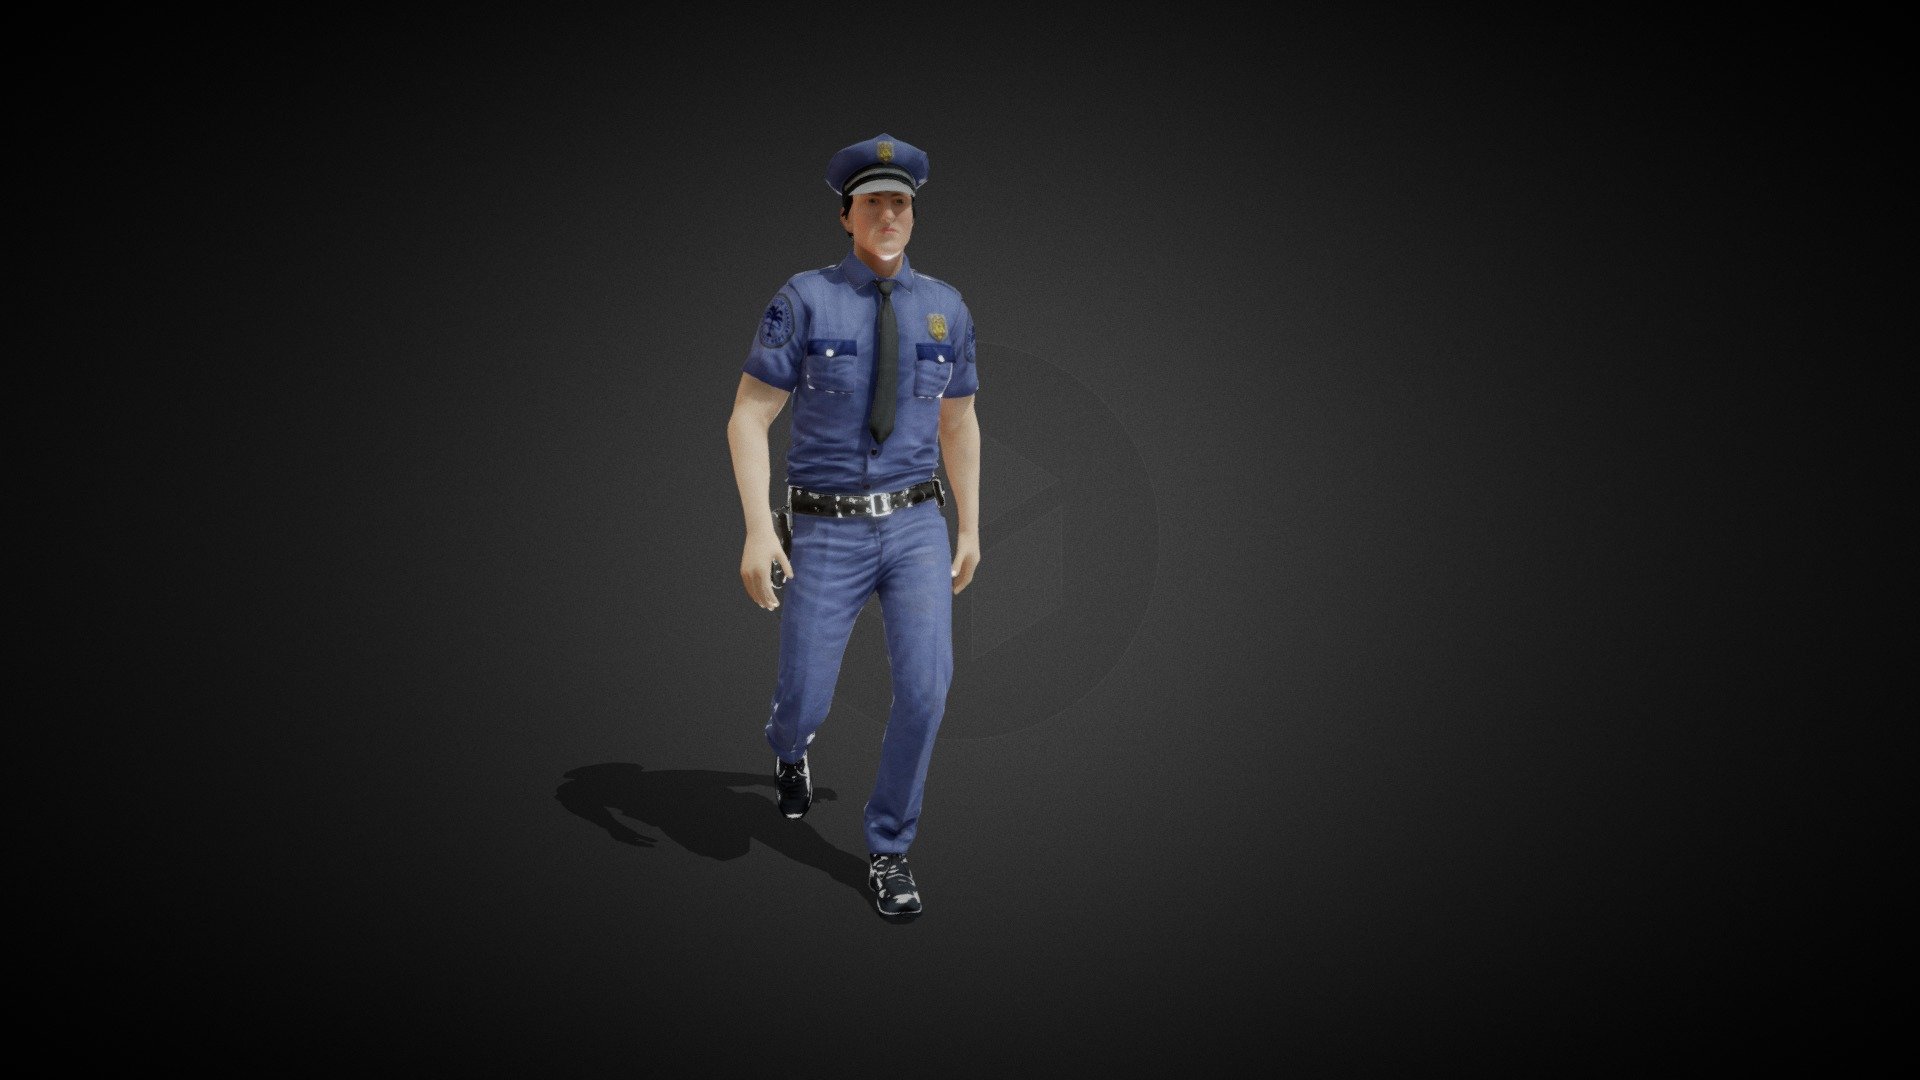 Policeman full animated. Ready for games.
You can ask for some extra animatios 3d model